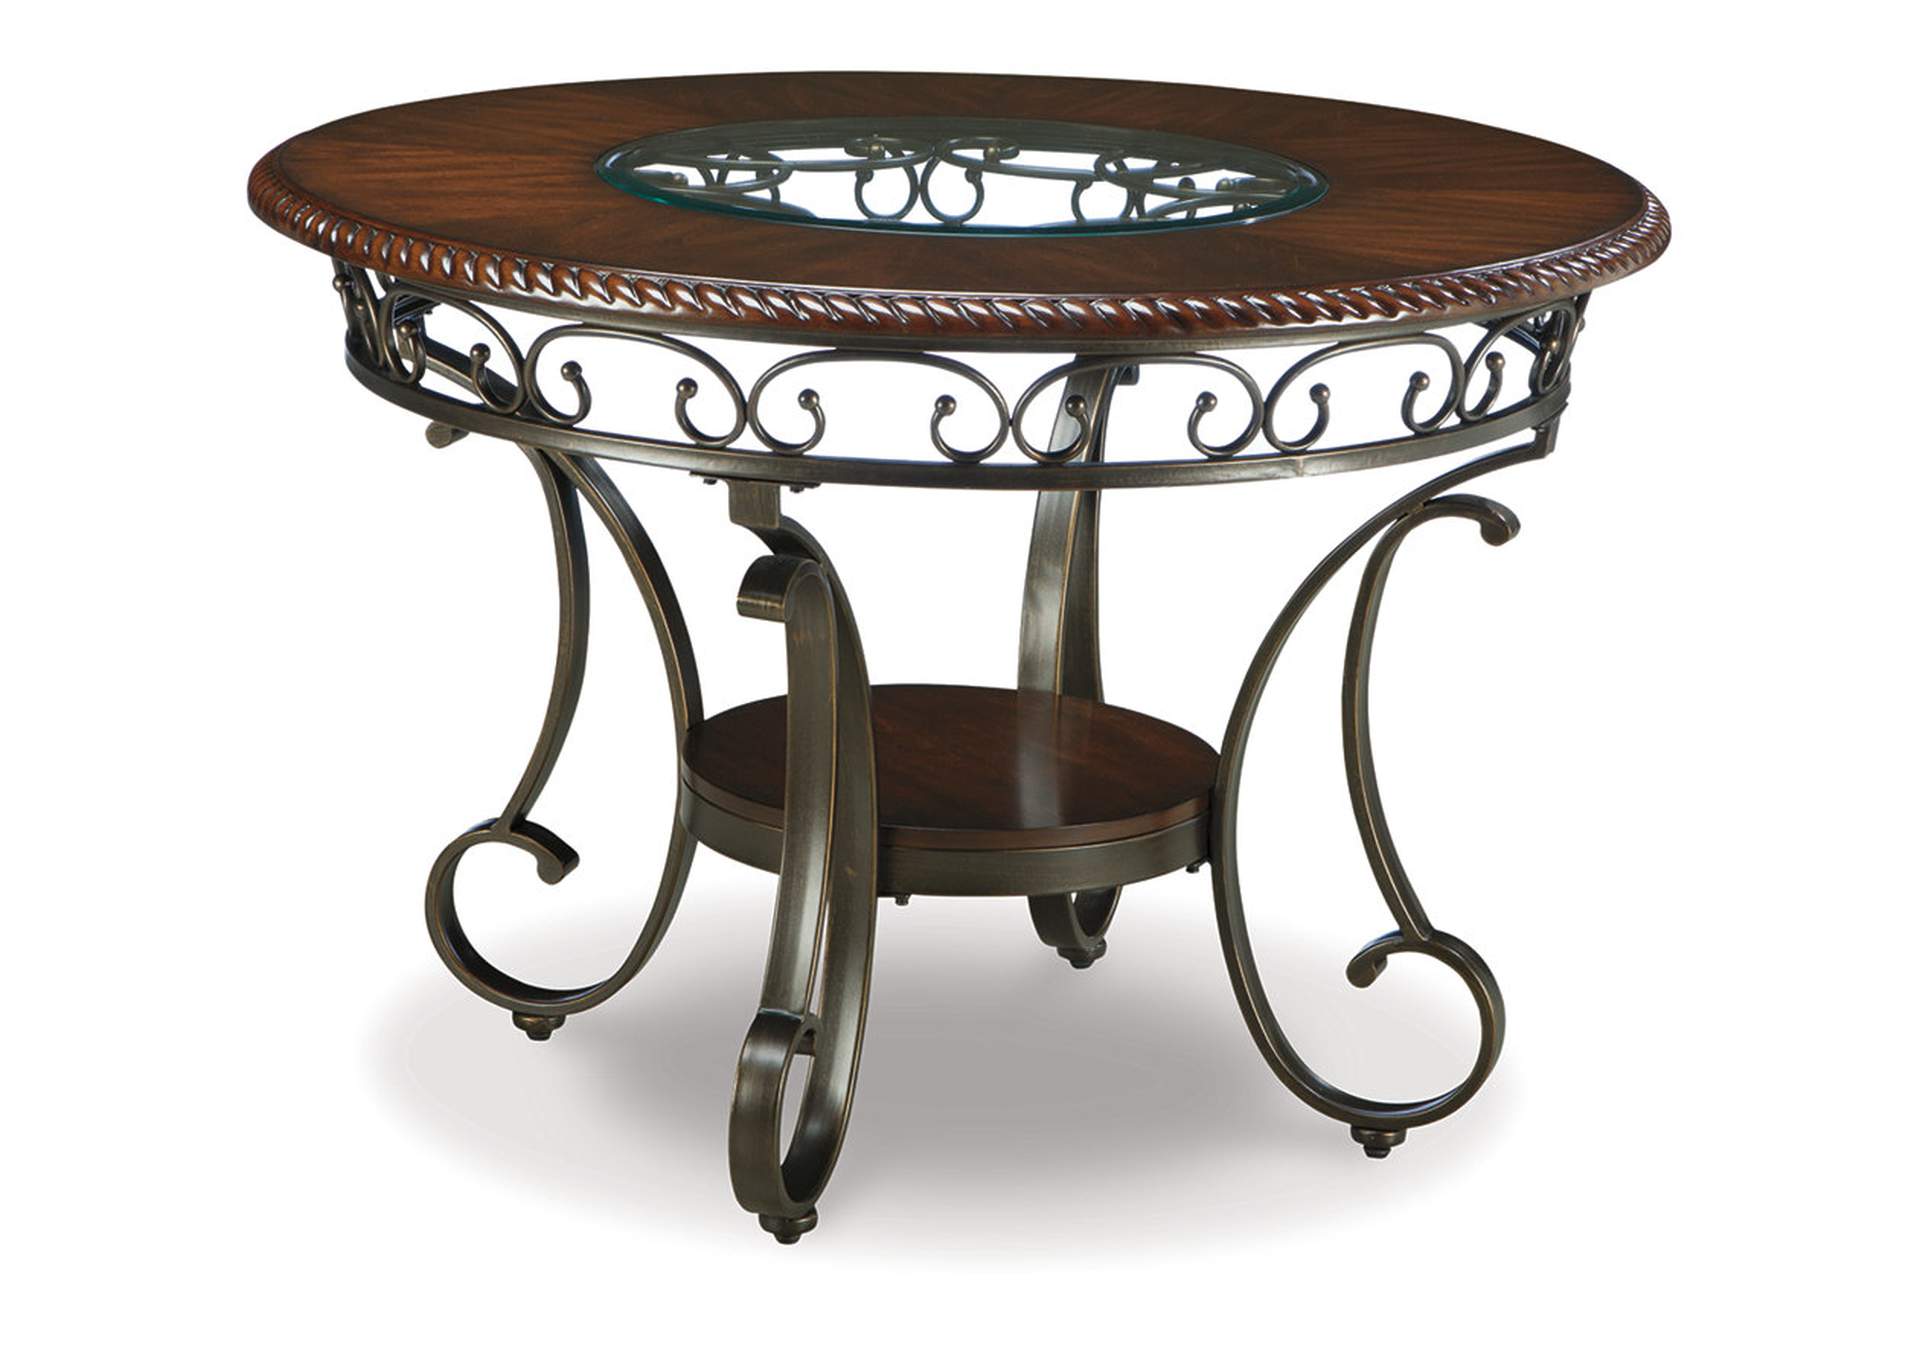 Glambrey Dining Table and 4 Chairs,Signature Design By Ashley